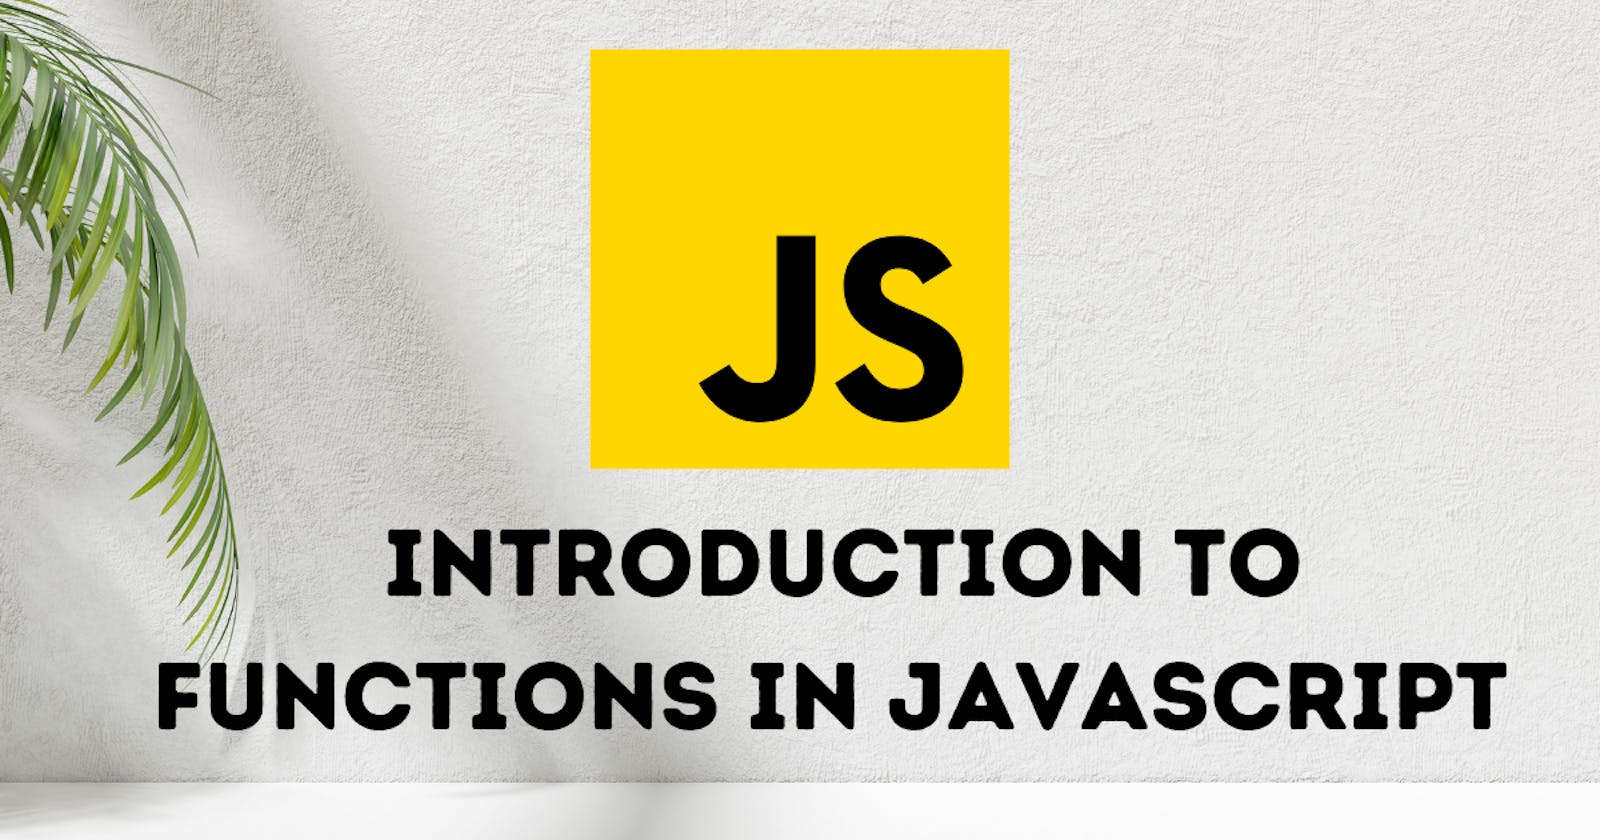 Introduction to Functions in JavaScript: Learning how to create and use functions.